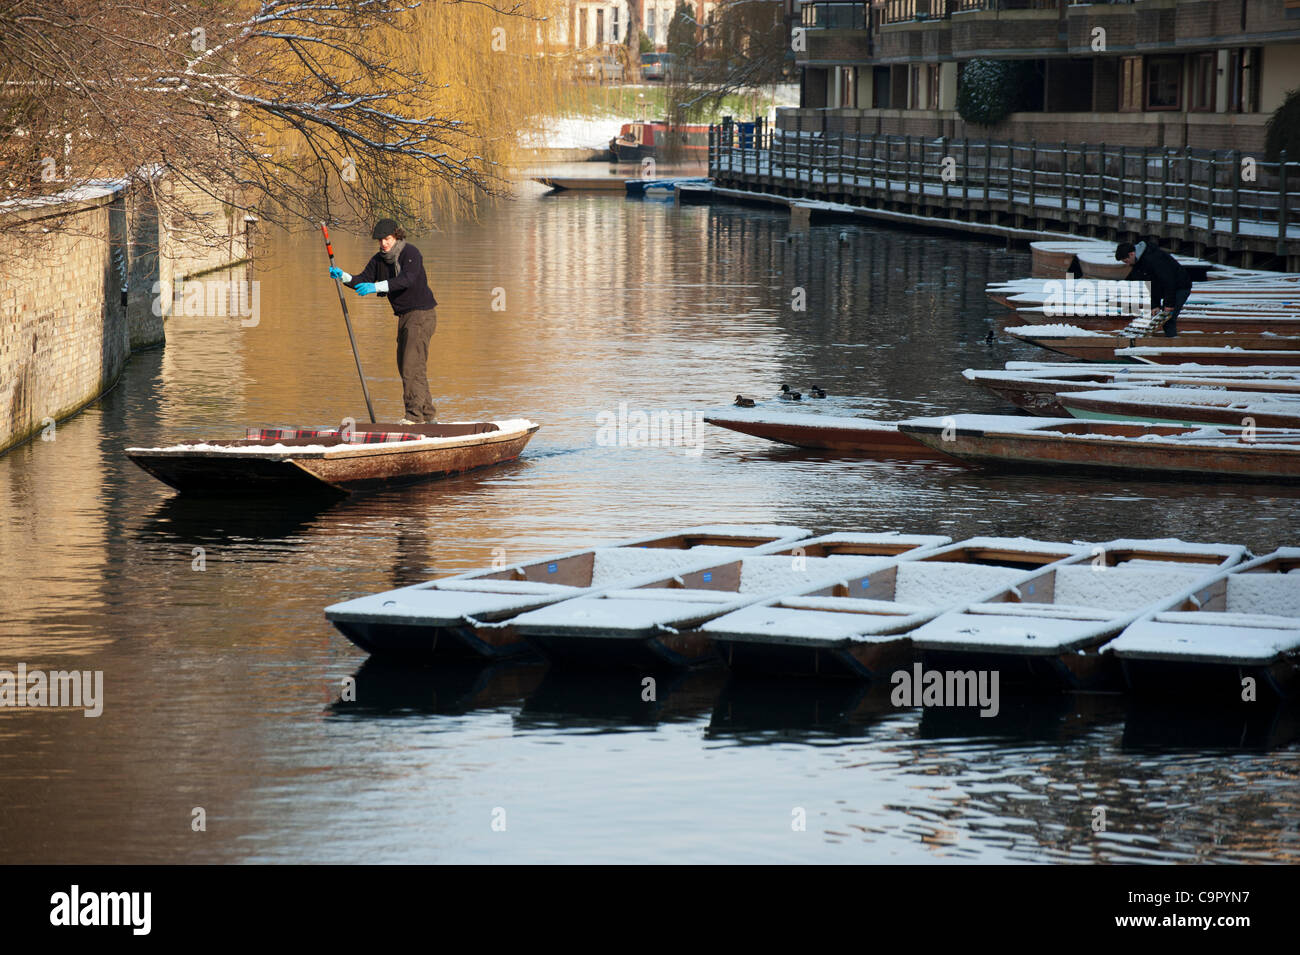 Cambridge, UK. 10th Feb, 2012. A punt is manoeuvred on the River Cam in Cambridge in snowy conditions on 10th February 2012. The tourist attraction continued despite the wintry weather. Stock Photo